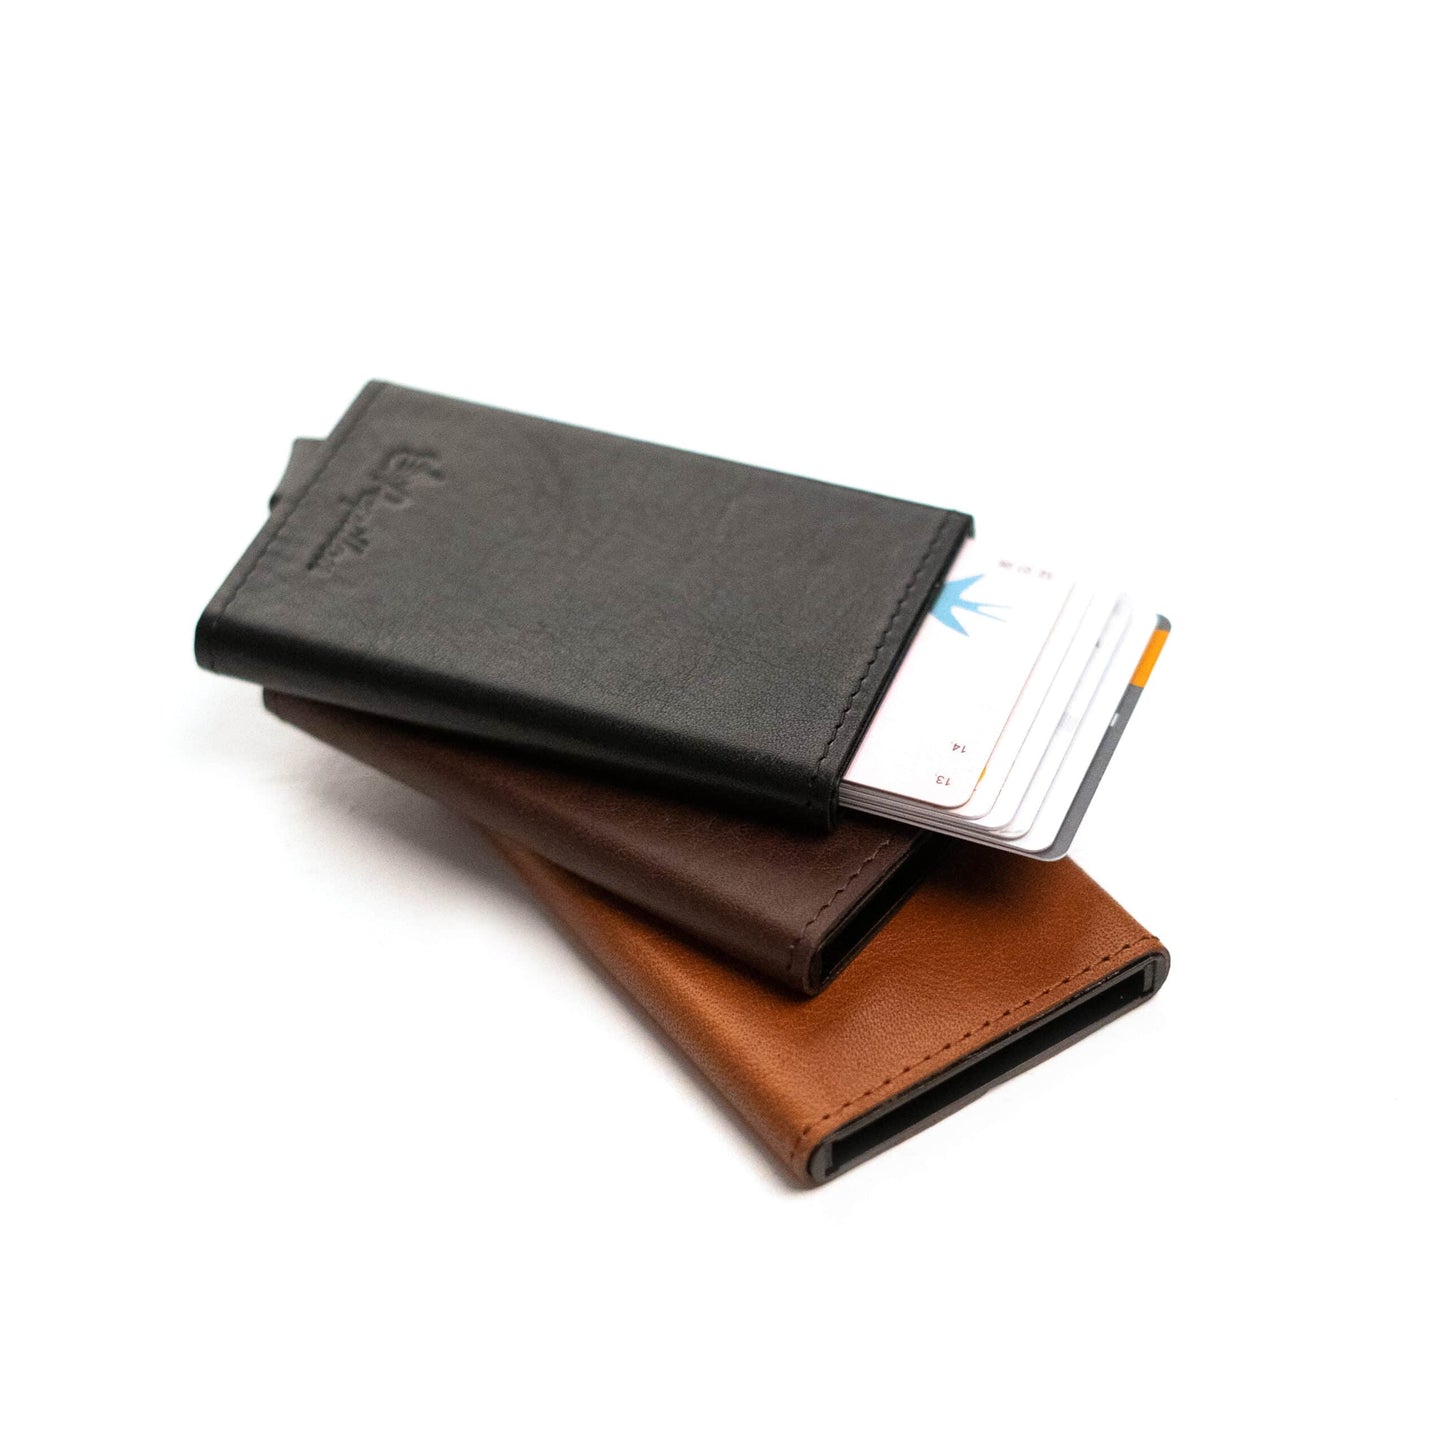 Card Holder (6 Cards): Genuine leather and aluminum case with RFID/NFC blocking. Sleek design, easy access, and durable craftsmanship from Men In Style.